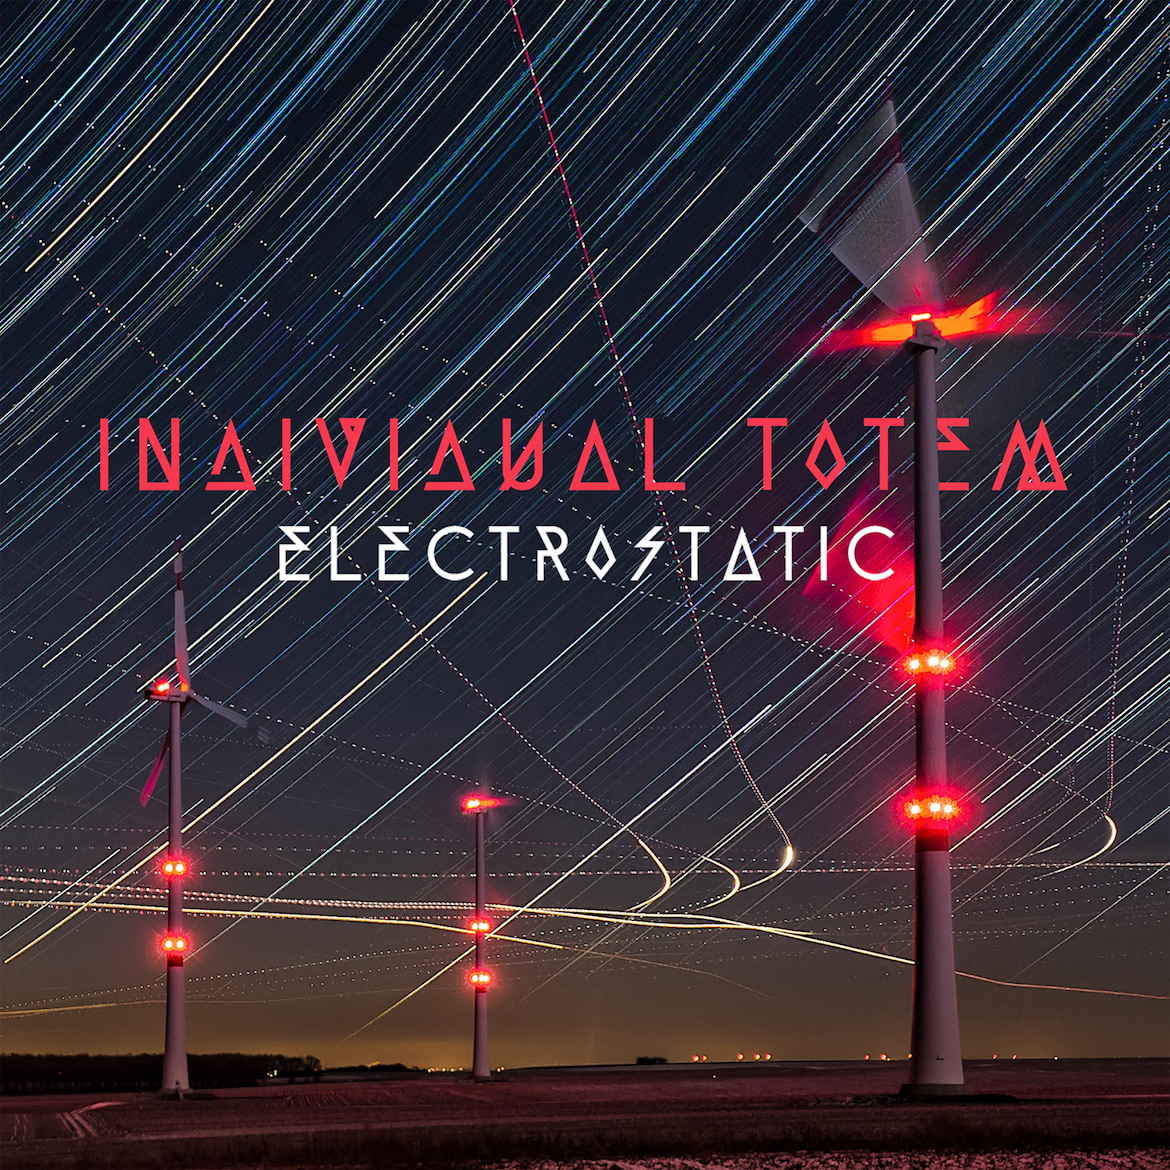 Electrostatic Album Cover from Individual Totem